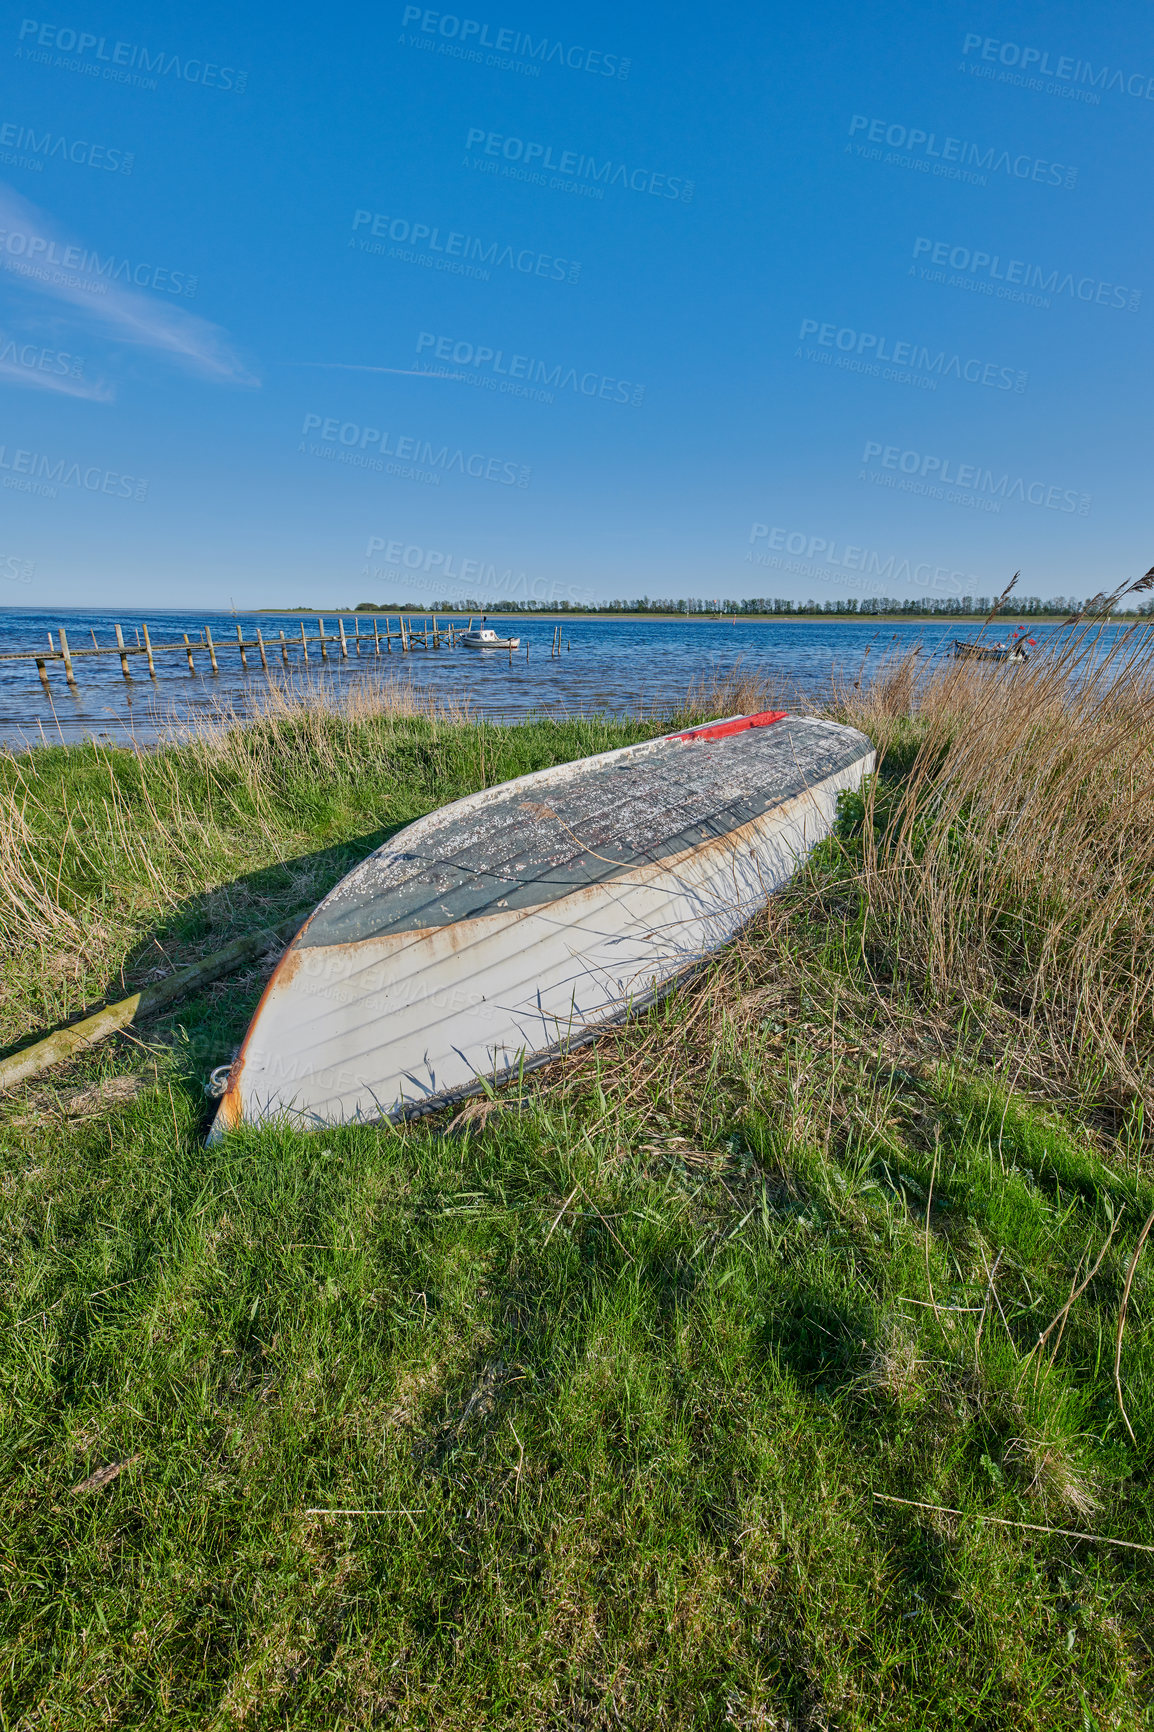 Buy stock photo An overturned abandoned wooden fishing boat on the shore of a lake.  A wooden fishing boat with a motor used in the sea or ocean to travel across a pond or a bay of water